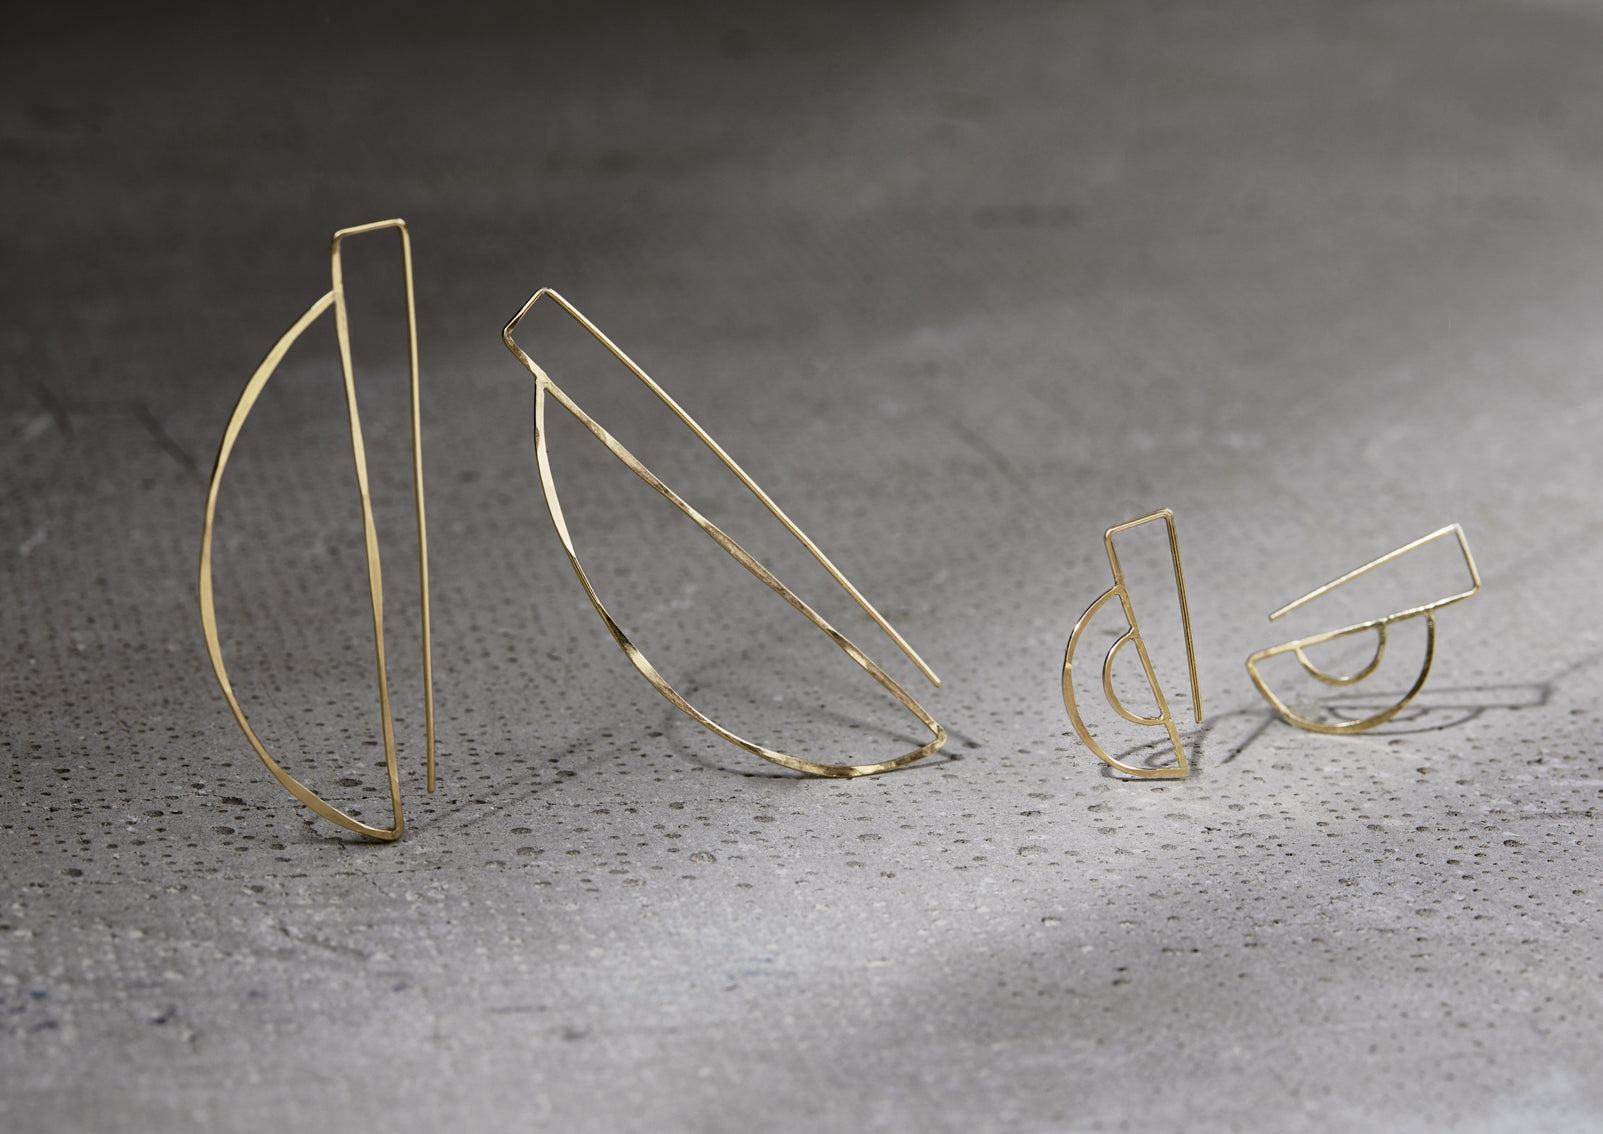 The Partition Hooks in 14k gold are chic threader earrings featuring a hand hammered semicircle shape